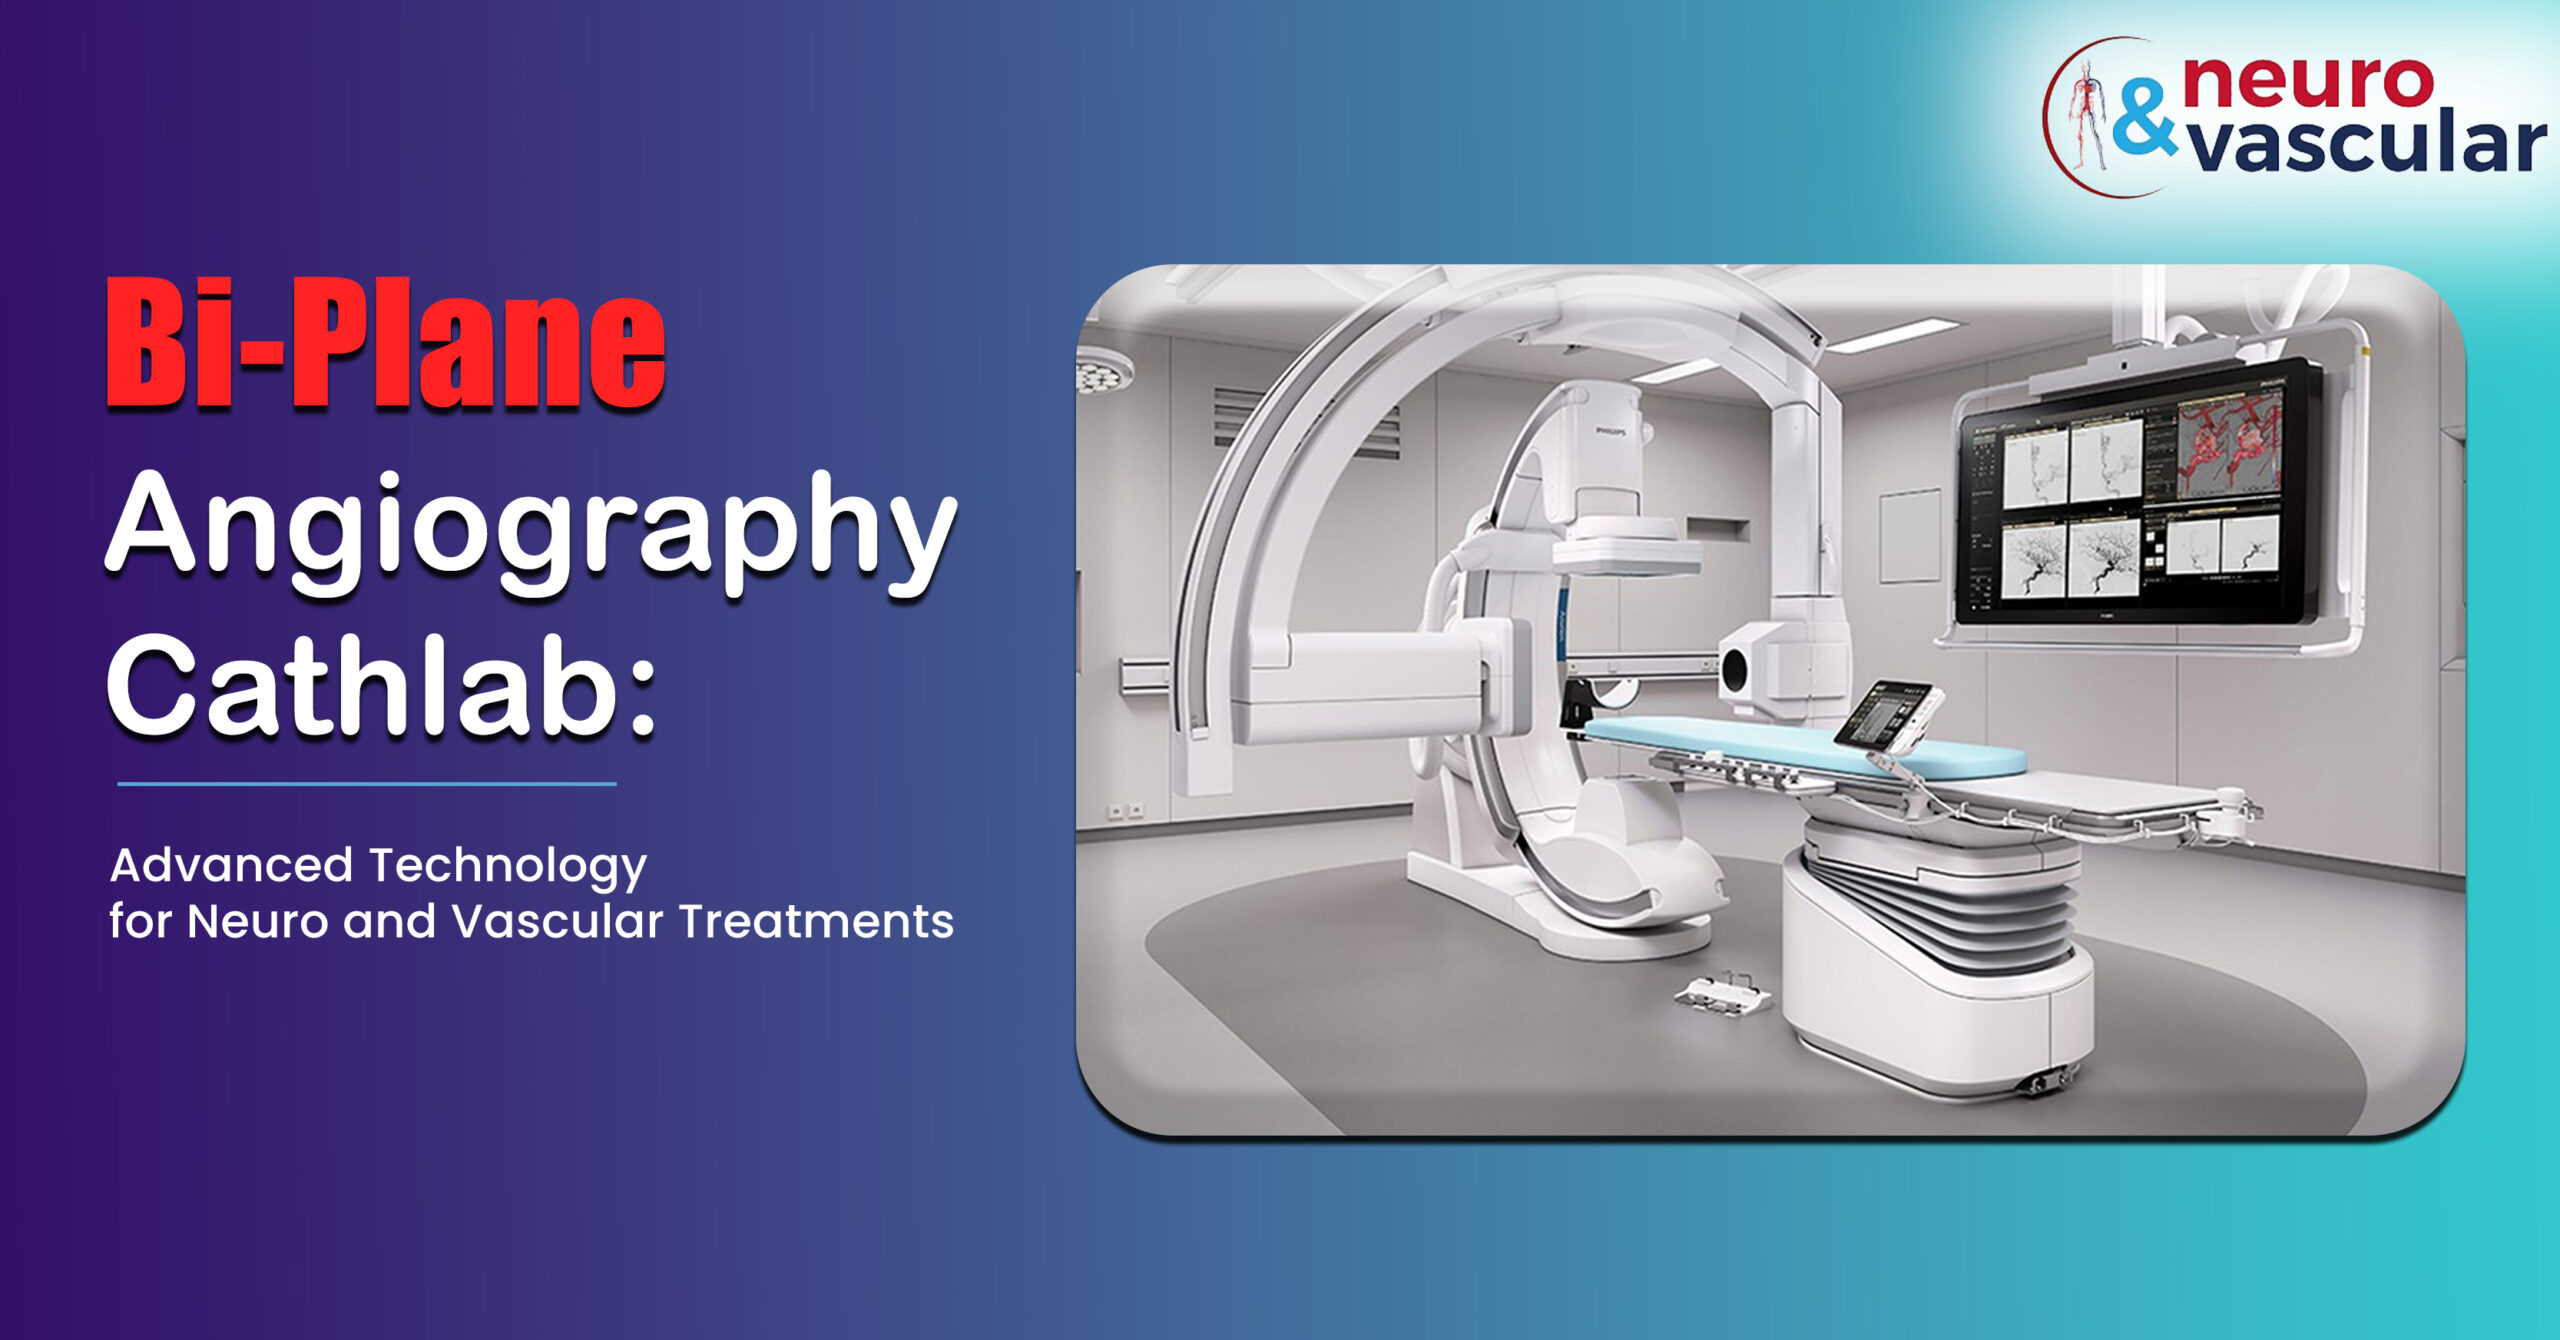 Bi-plane Angiography Cathlab: Advanced Technology for Neuro and Vascular Treatments